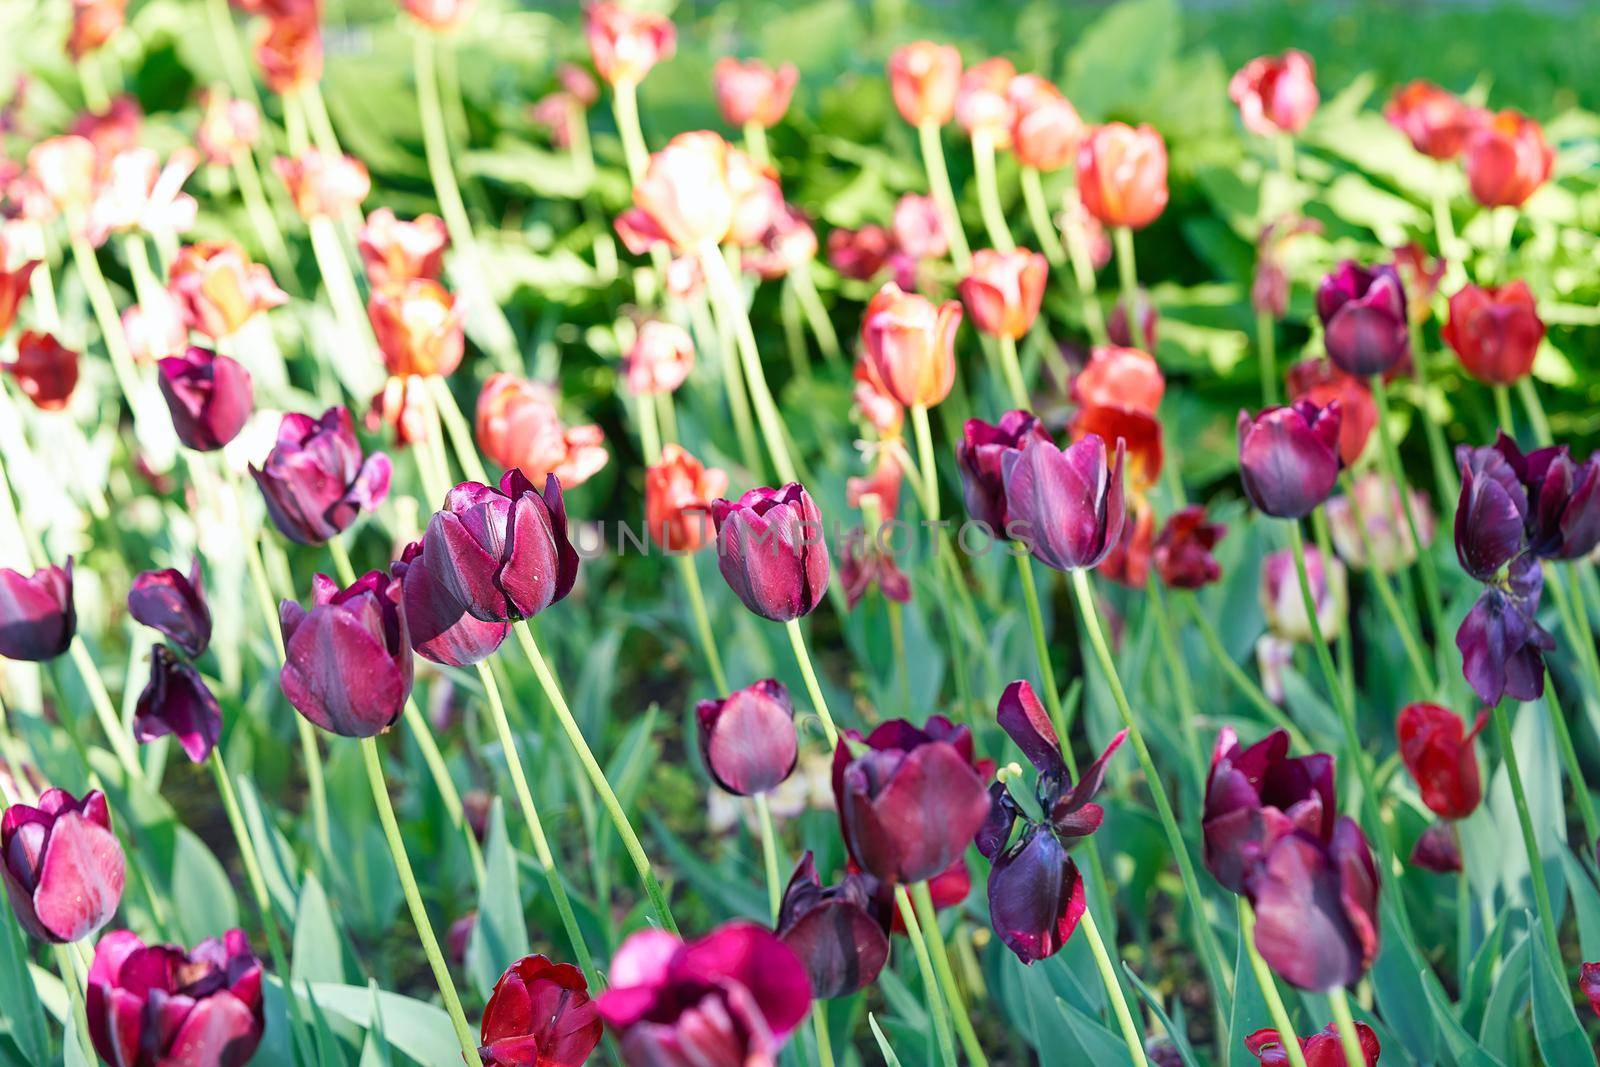 Bright flowers of tulips on a tulip field on a sunny morning, spring flowers tulips